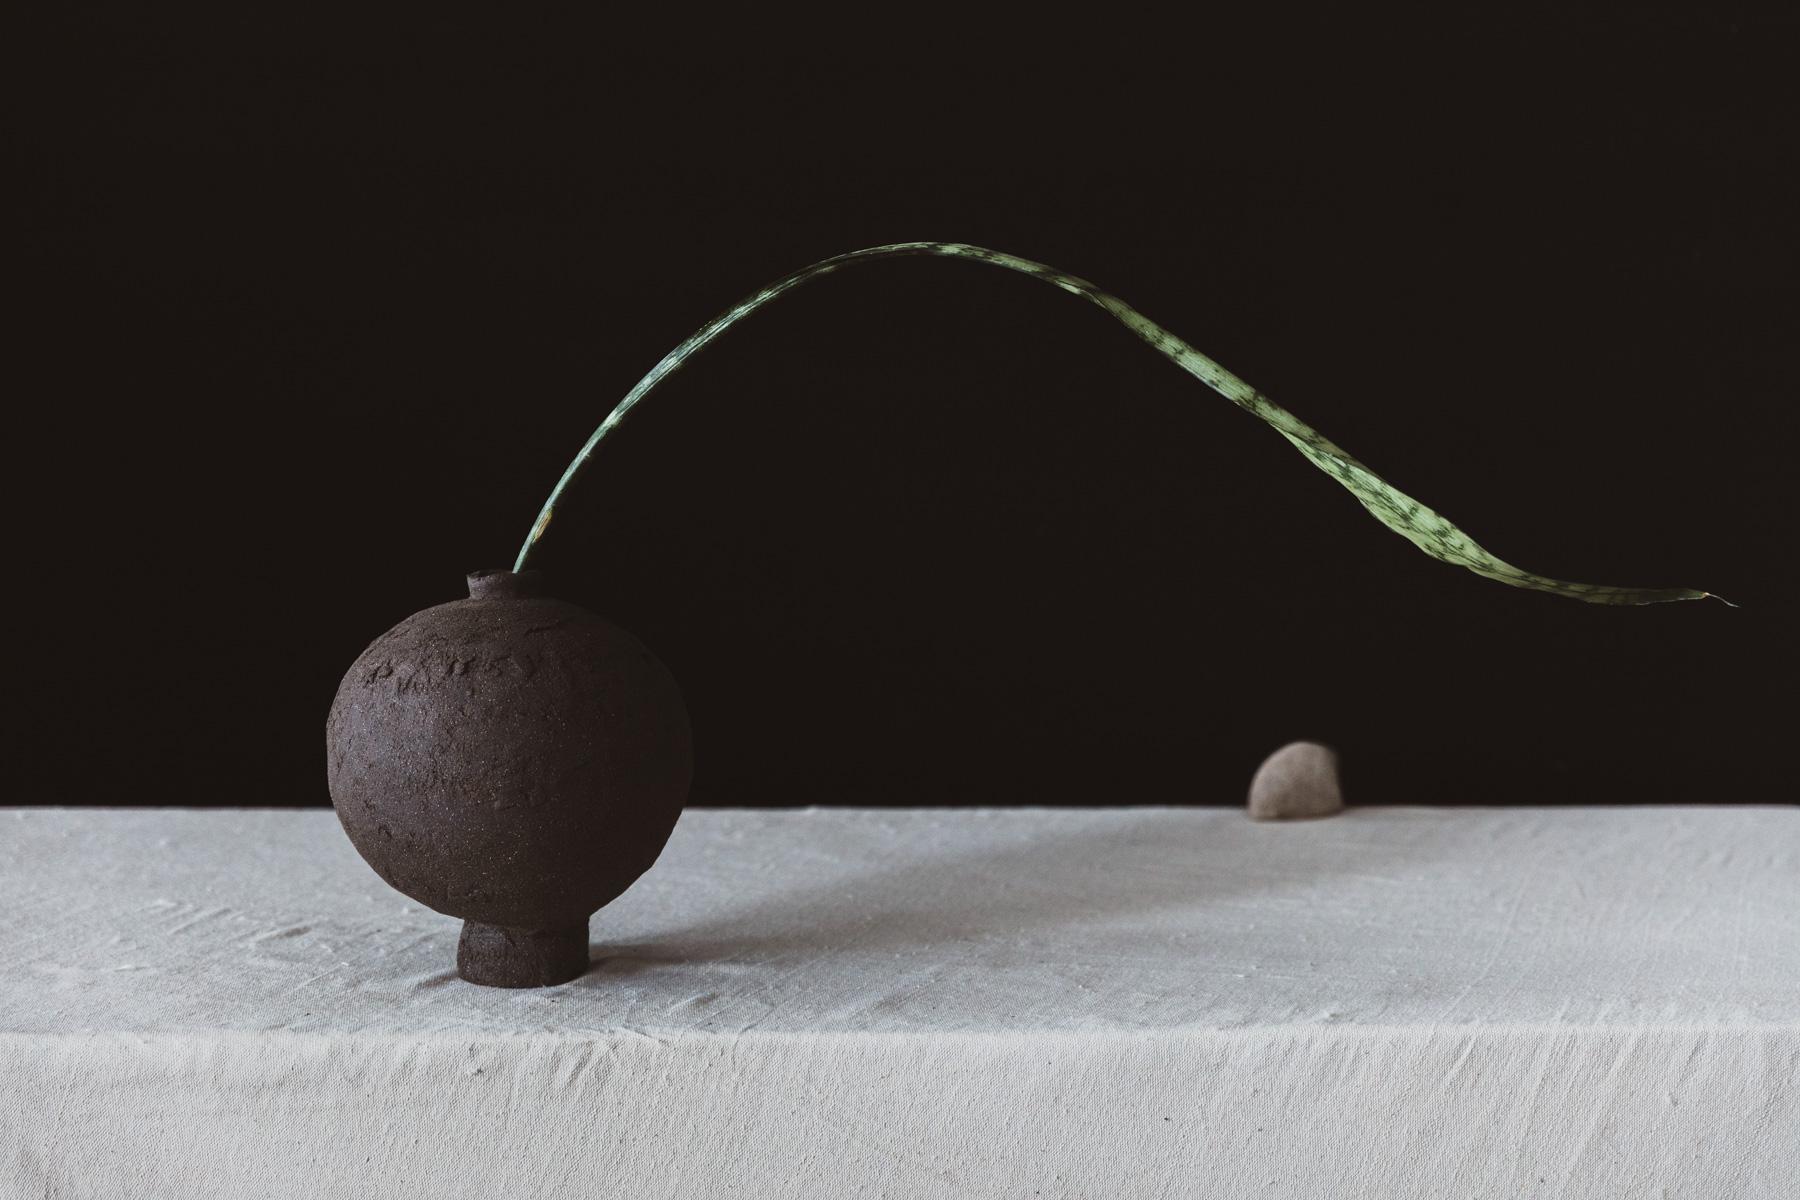 The Dark River Moon Jar is an elegant moon jar made of black sculpture clay. Mysterious in its minimal and refined nature. The raw clay provides a texture that displays the marks of the maker, simple and stunning.

This vessel is part of the Mugly.